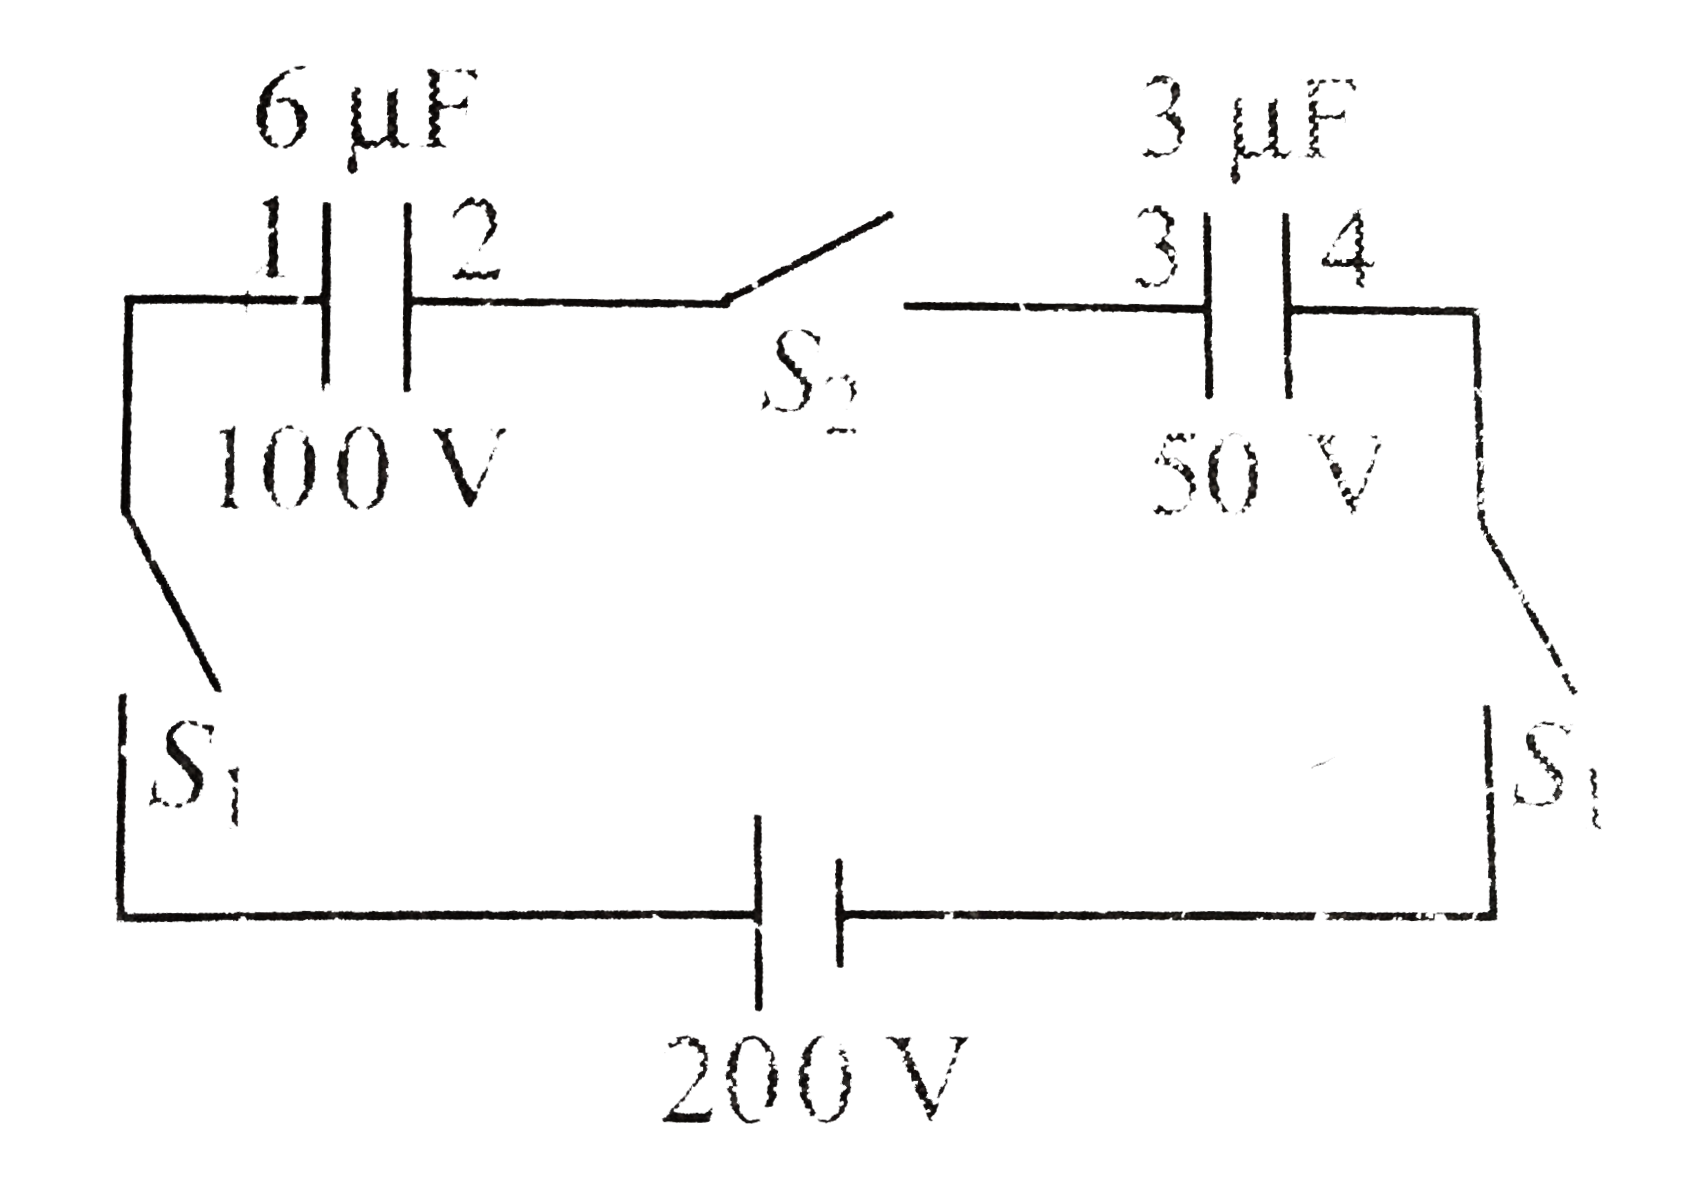 Two capacitor of capacity 6 muF and 3muF are charged to 100 V and 50 V separately and connected as shown in figure. Now all the three switches S1,S2, and S3 are closed.      Charges on 6muF And 3muF capacitors in steady state will be